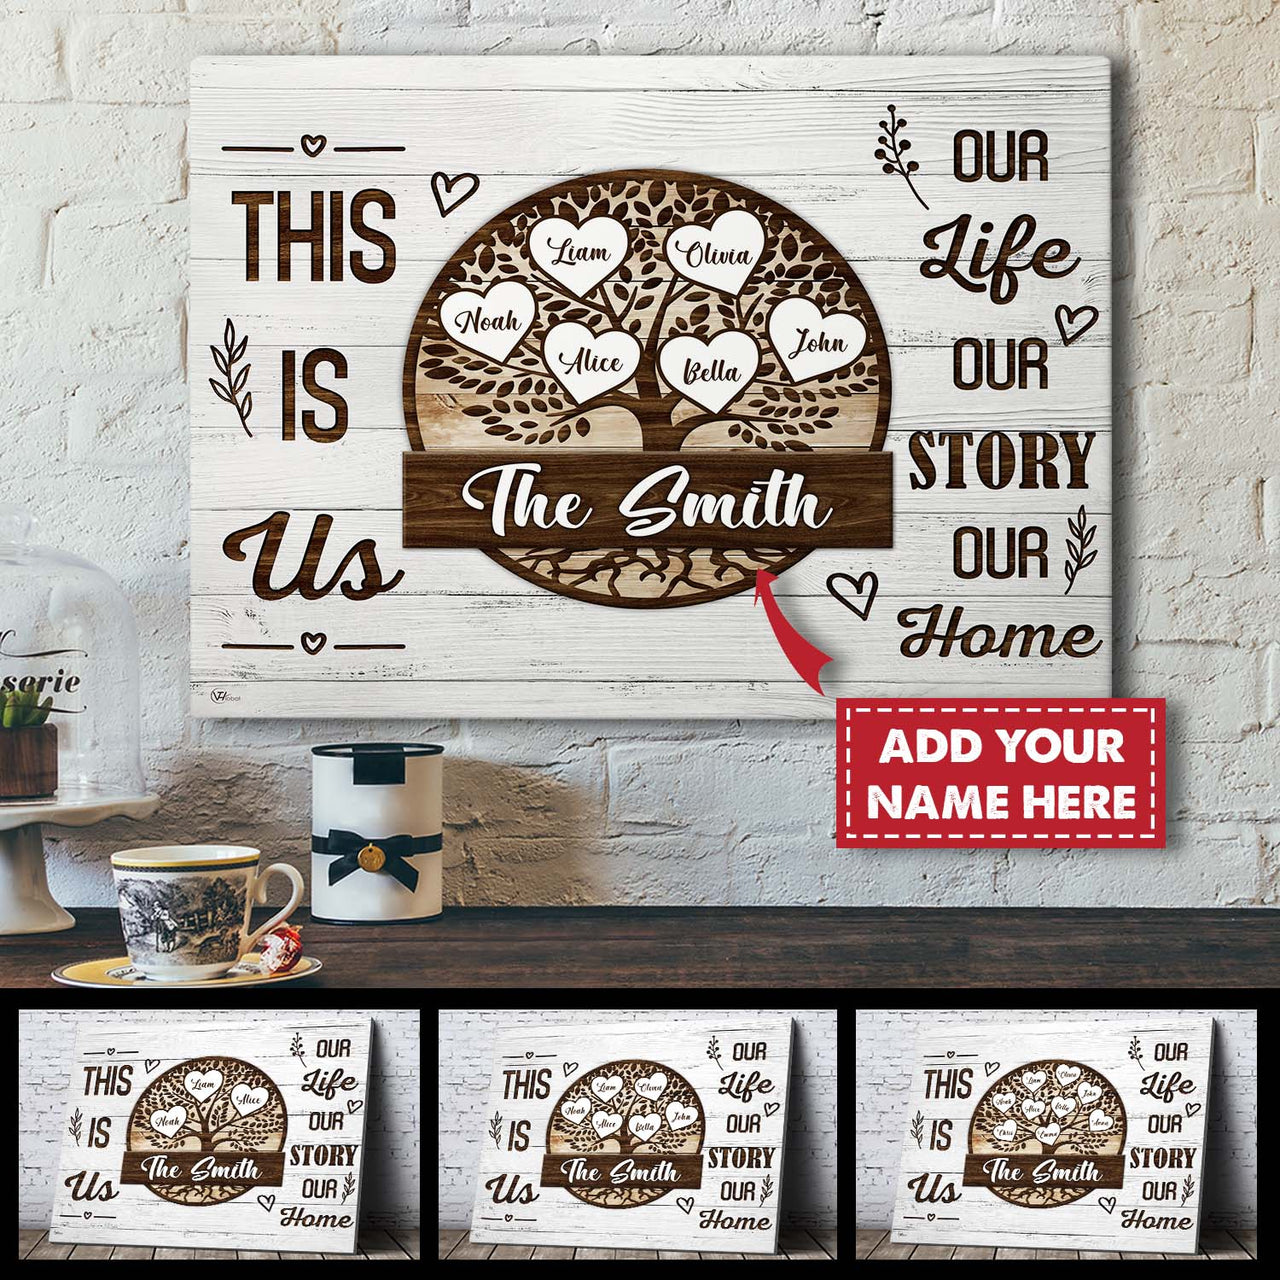 Personalized Family Signs Gifts - This Is Us Our Life Our Story Our Home Canvas Print Wall Art - Anniversary Gift